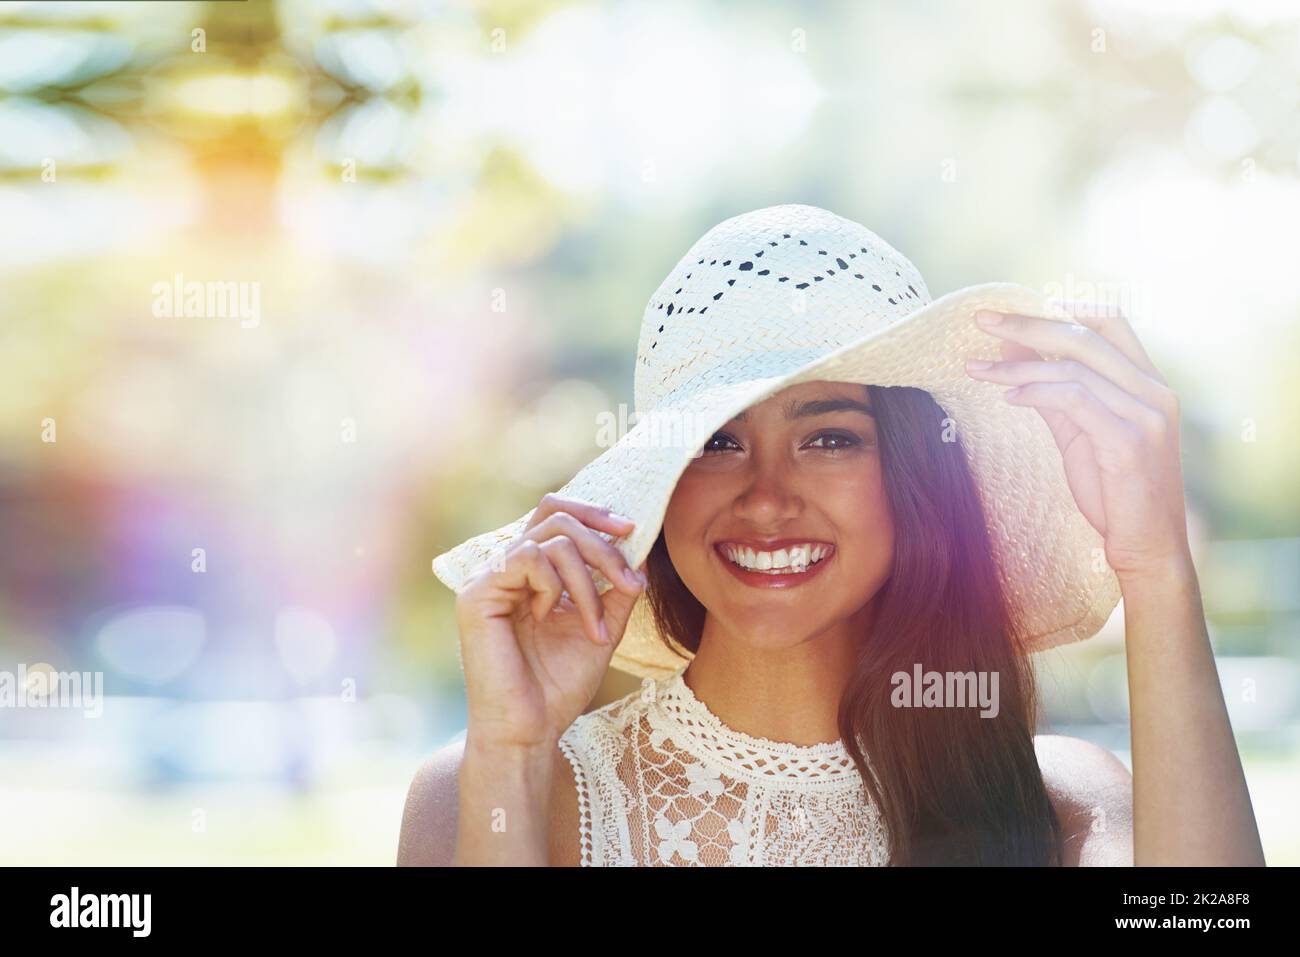 Protecting my skin against the summer sun. A happy young woman standing in the park wearing a sunhat. Stock Photo